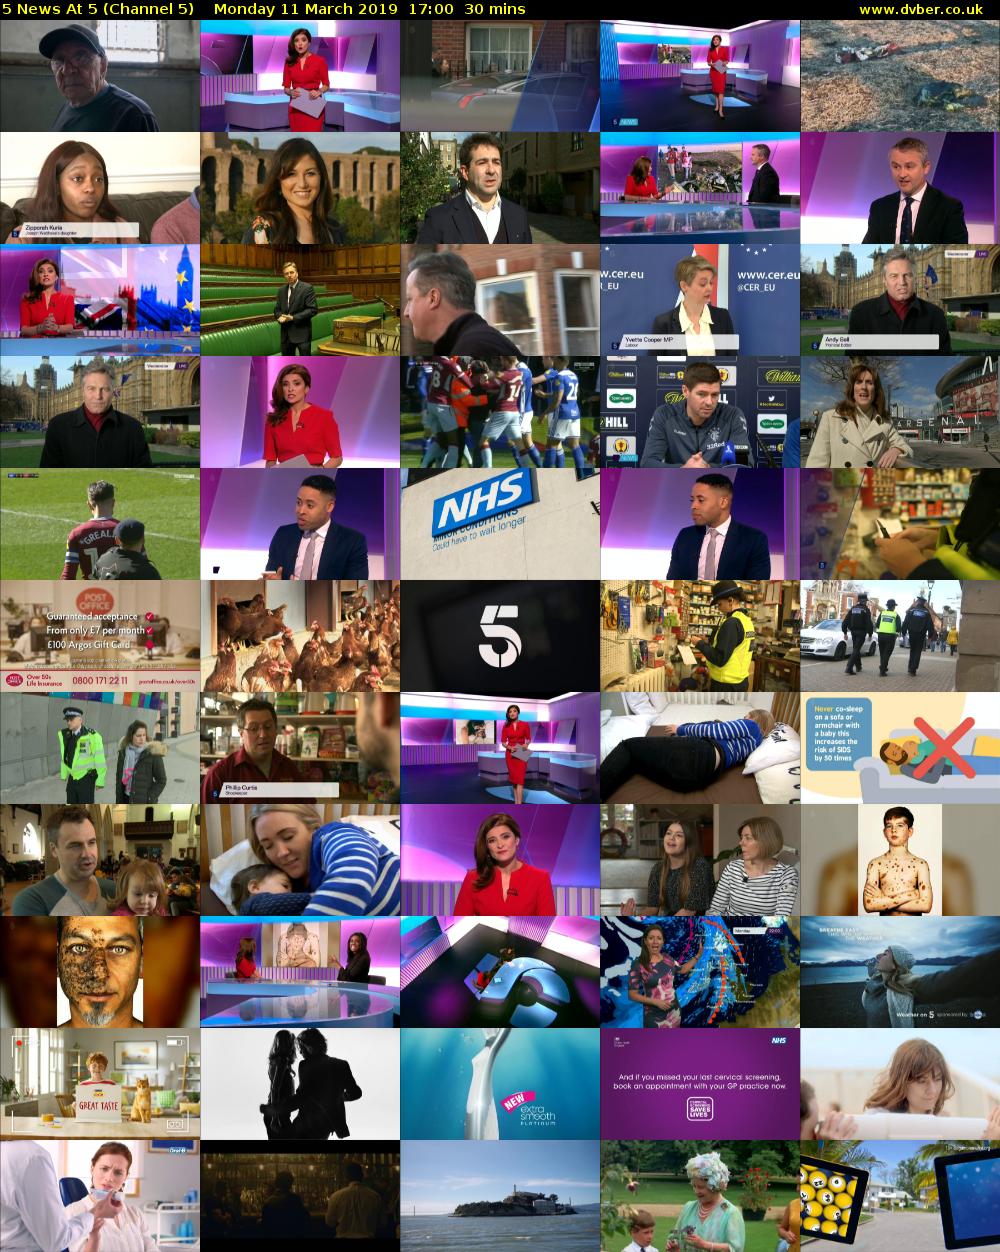 5 News At 5 (Channel 5) Monday 11 March 2019 17:00 - 17:30